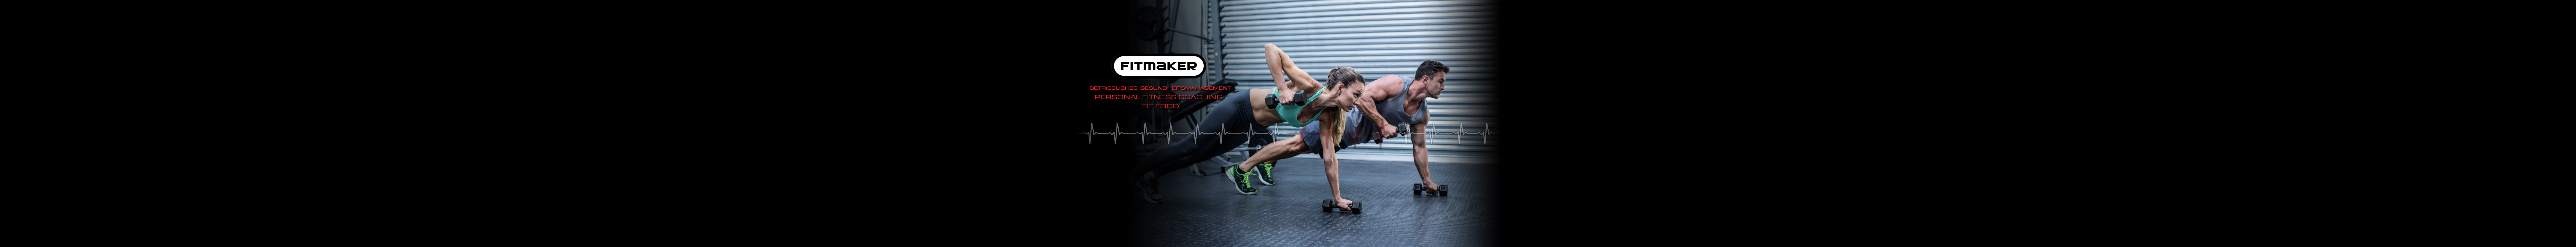 Header Image - Personal Fitness Coach